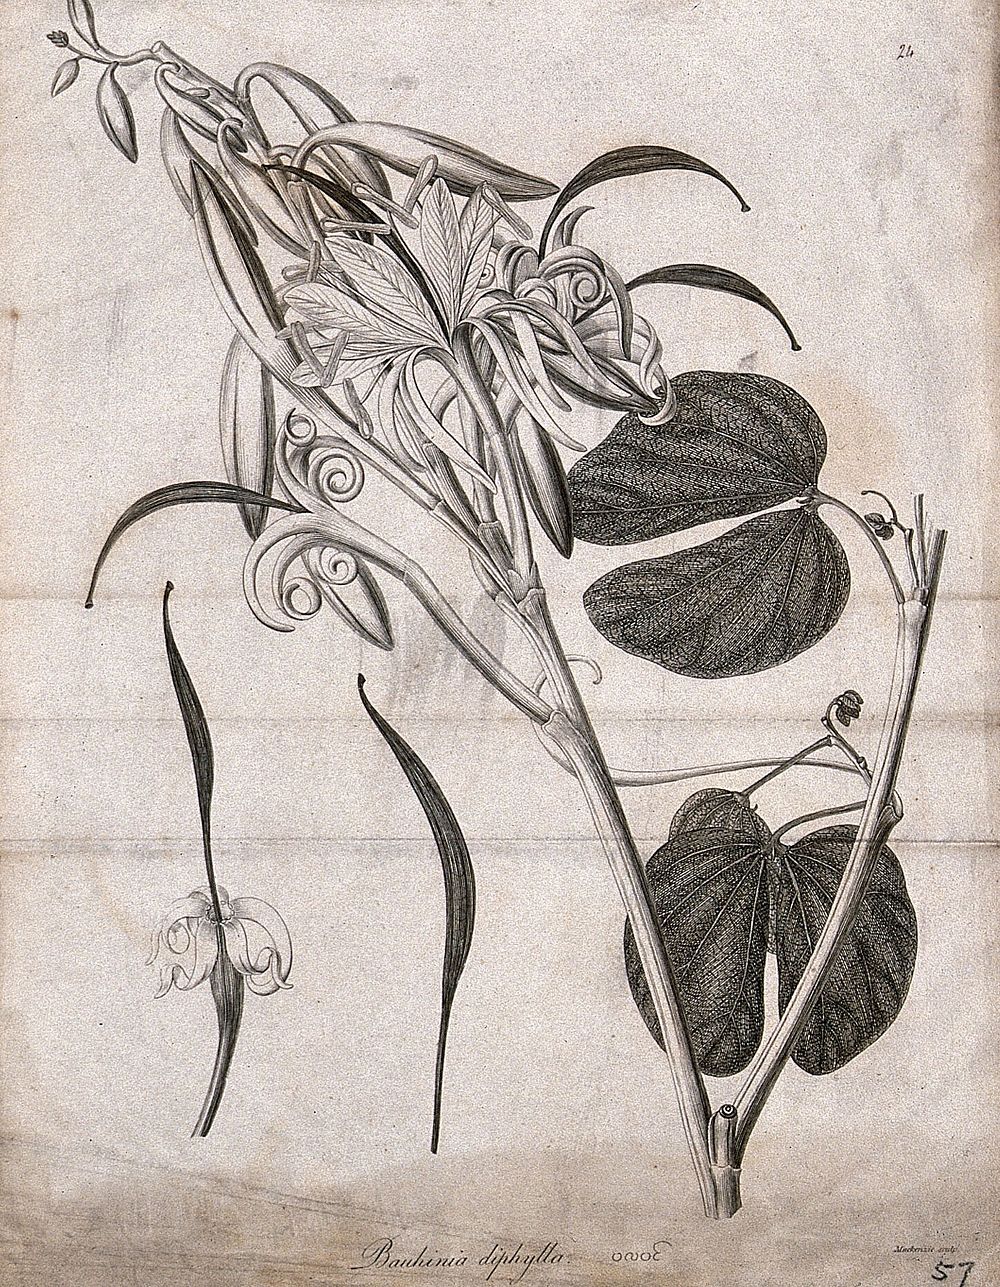 Butterfly tree or camel's foot (Bauhinia diphylla): flowering stem with floral segments. Line engraving by Mackenzie, c.1795.